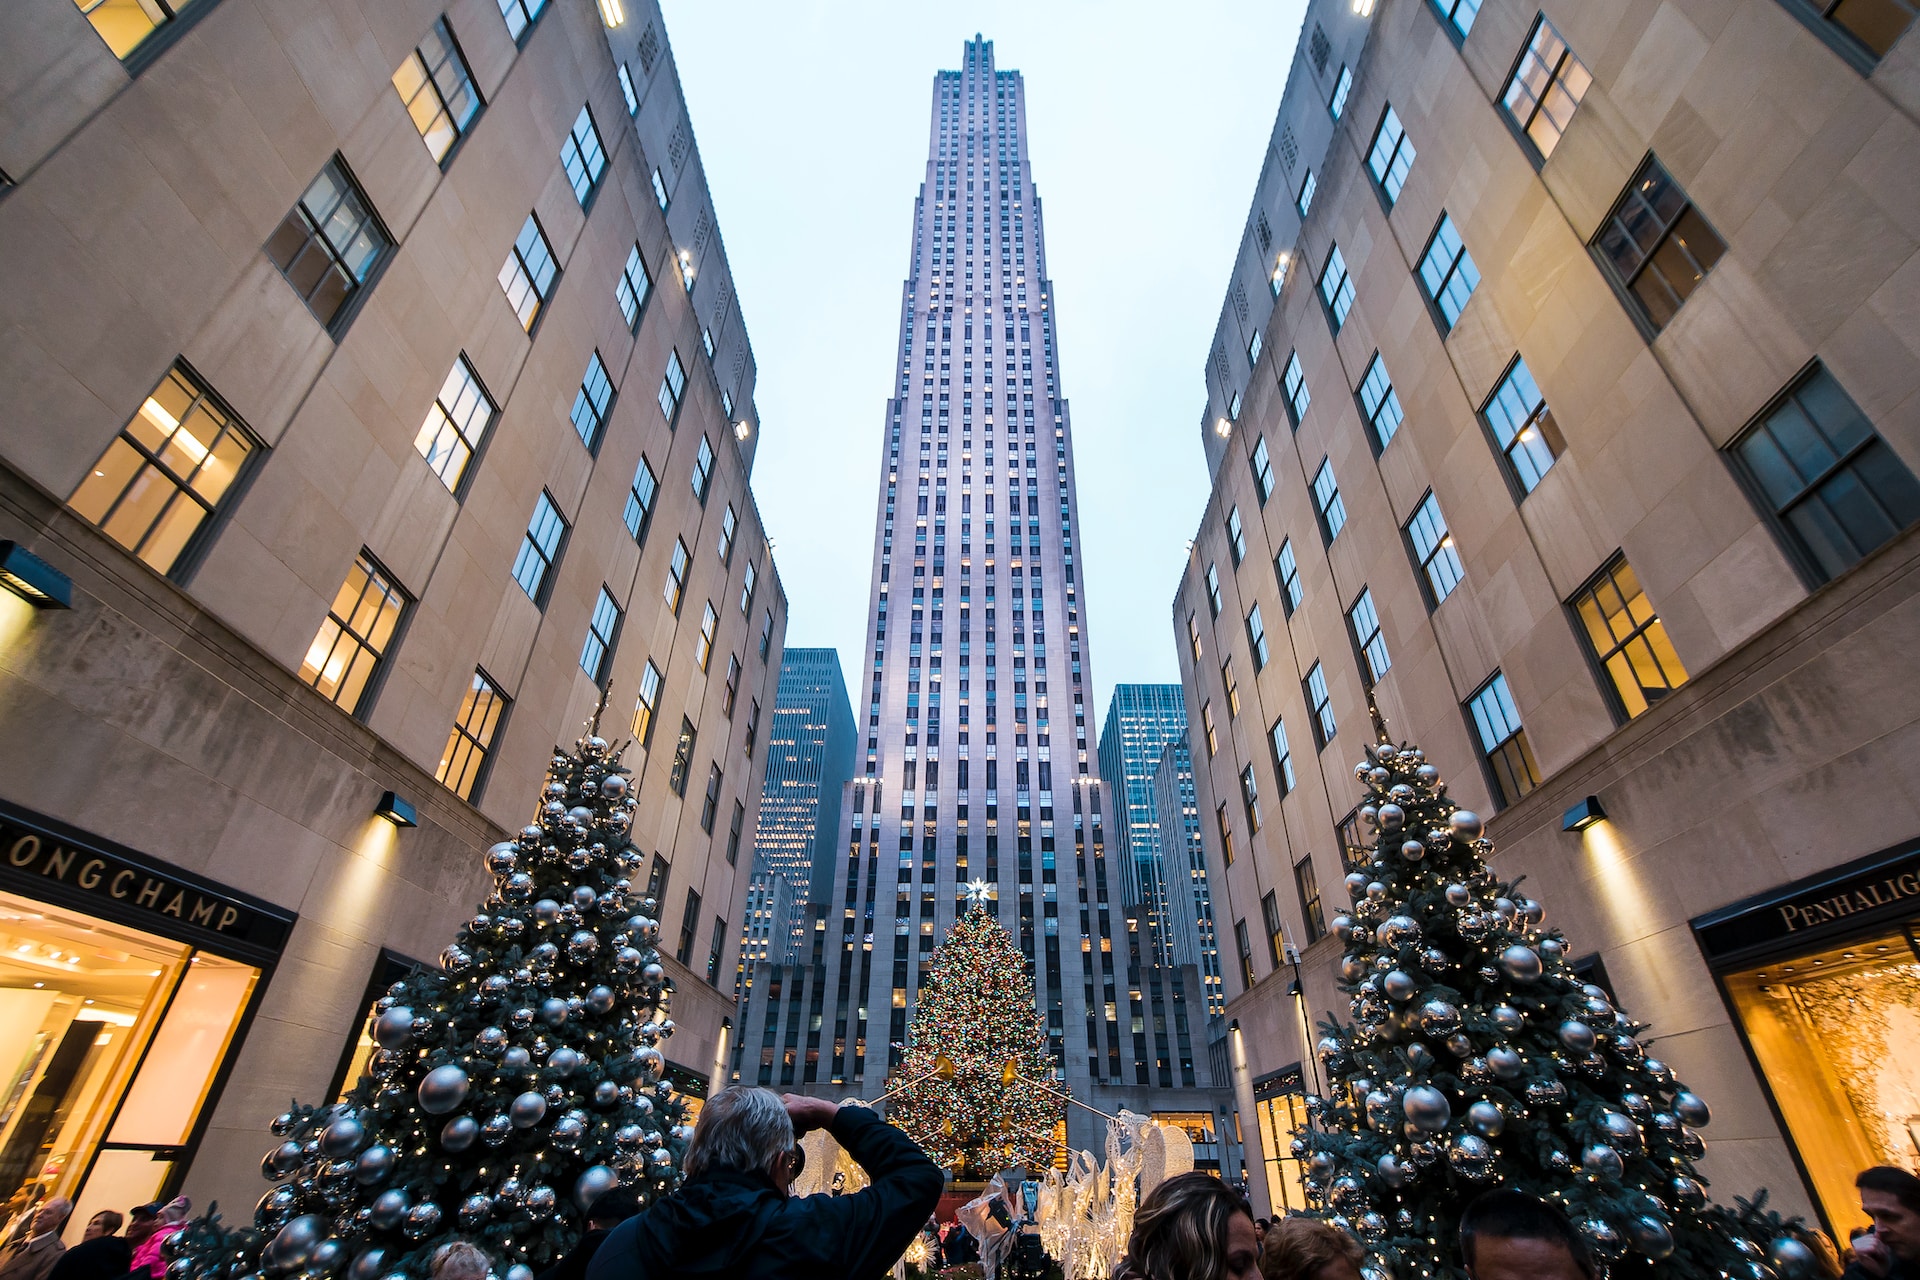 Let's learn all about the Christmas traditions in New York!